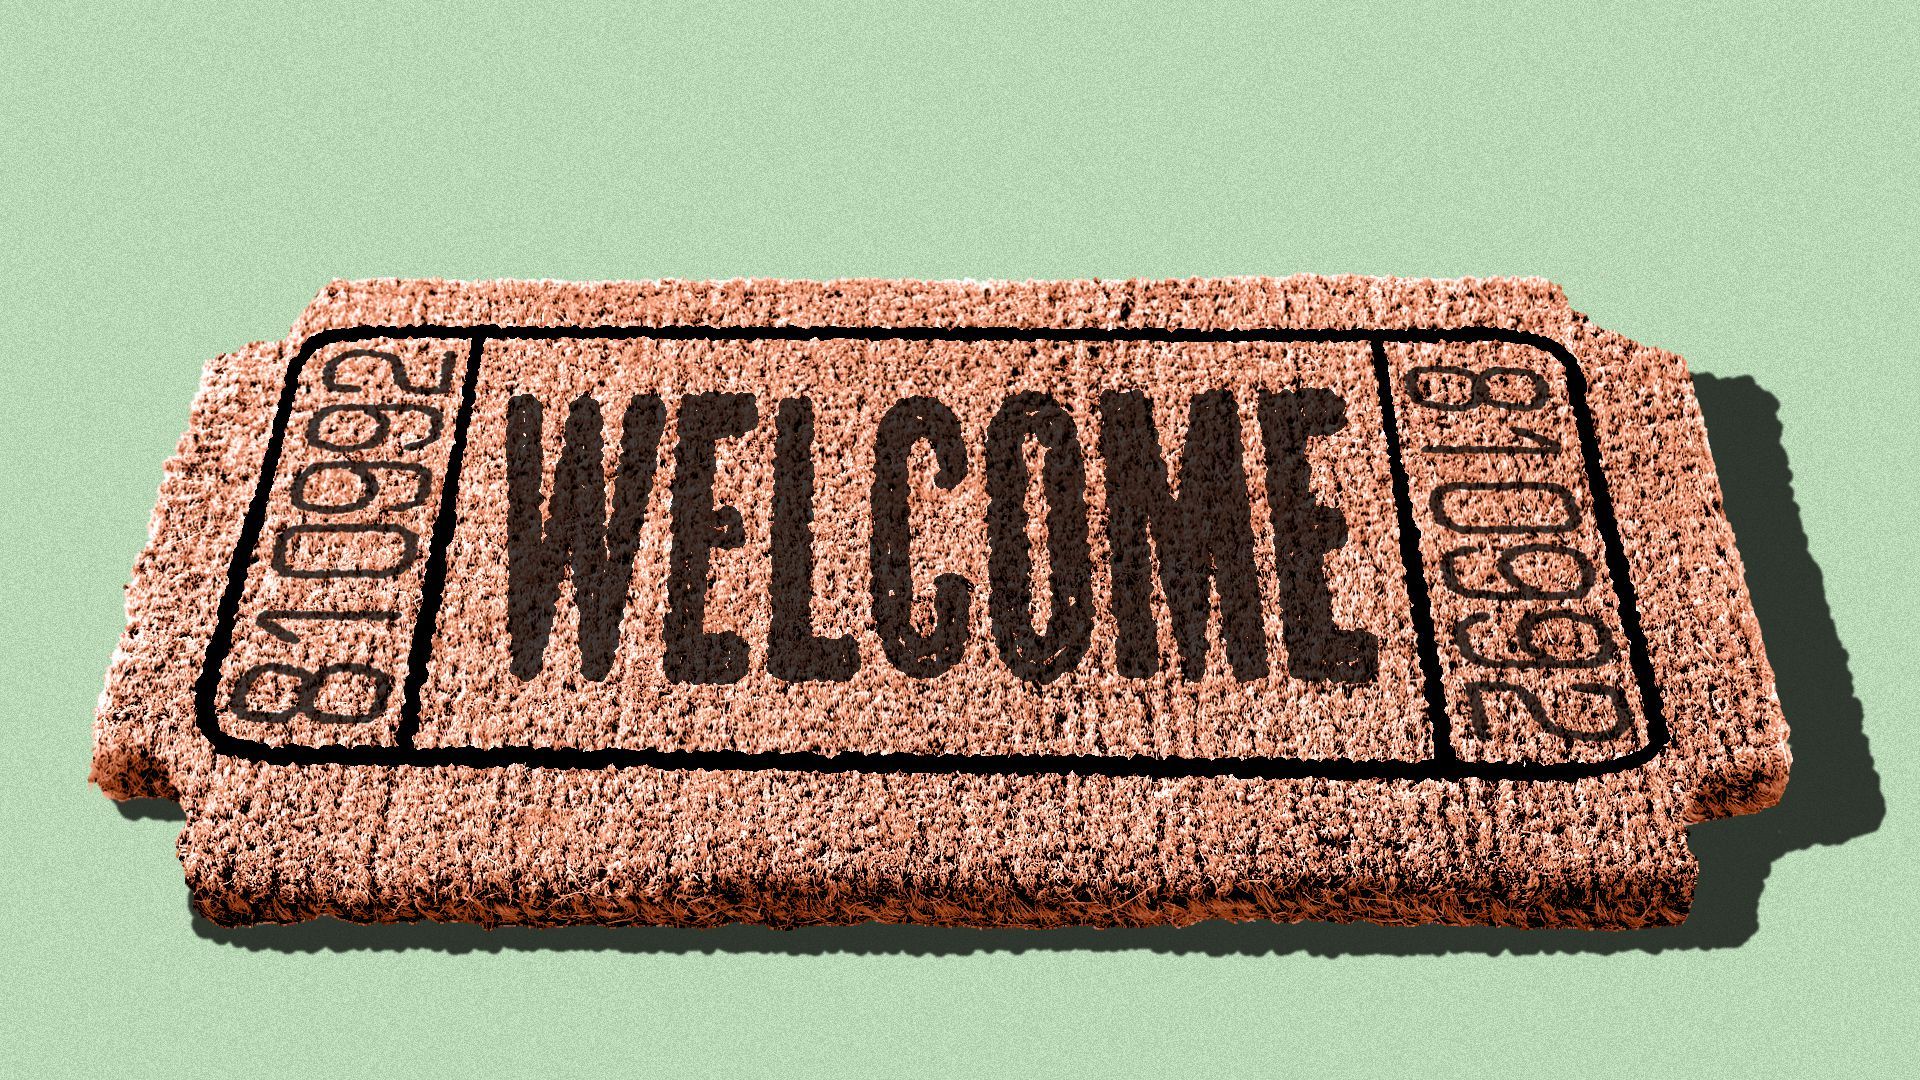 Illustration of a welcome mat in the shape of a ticket or voucher.